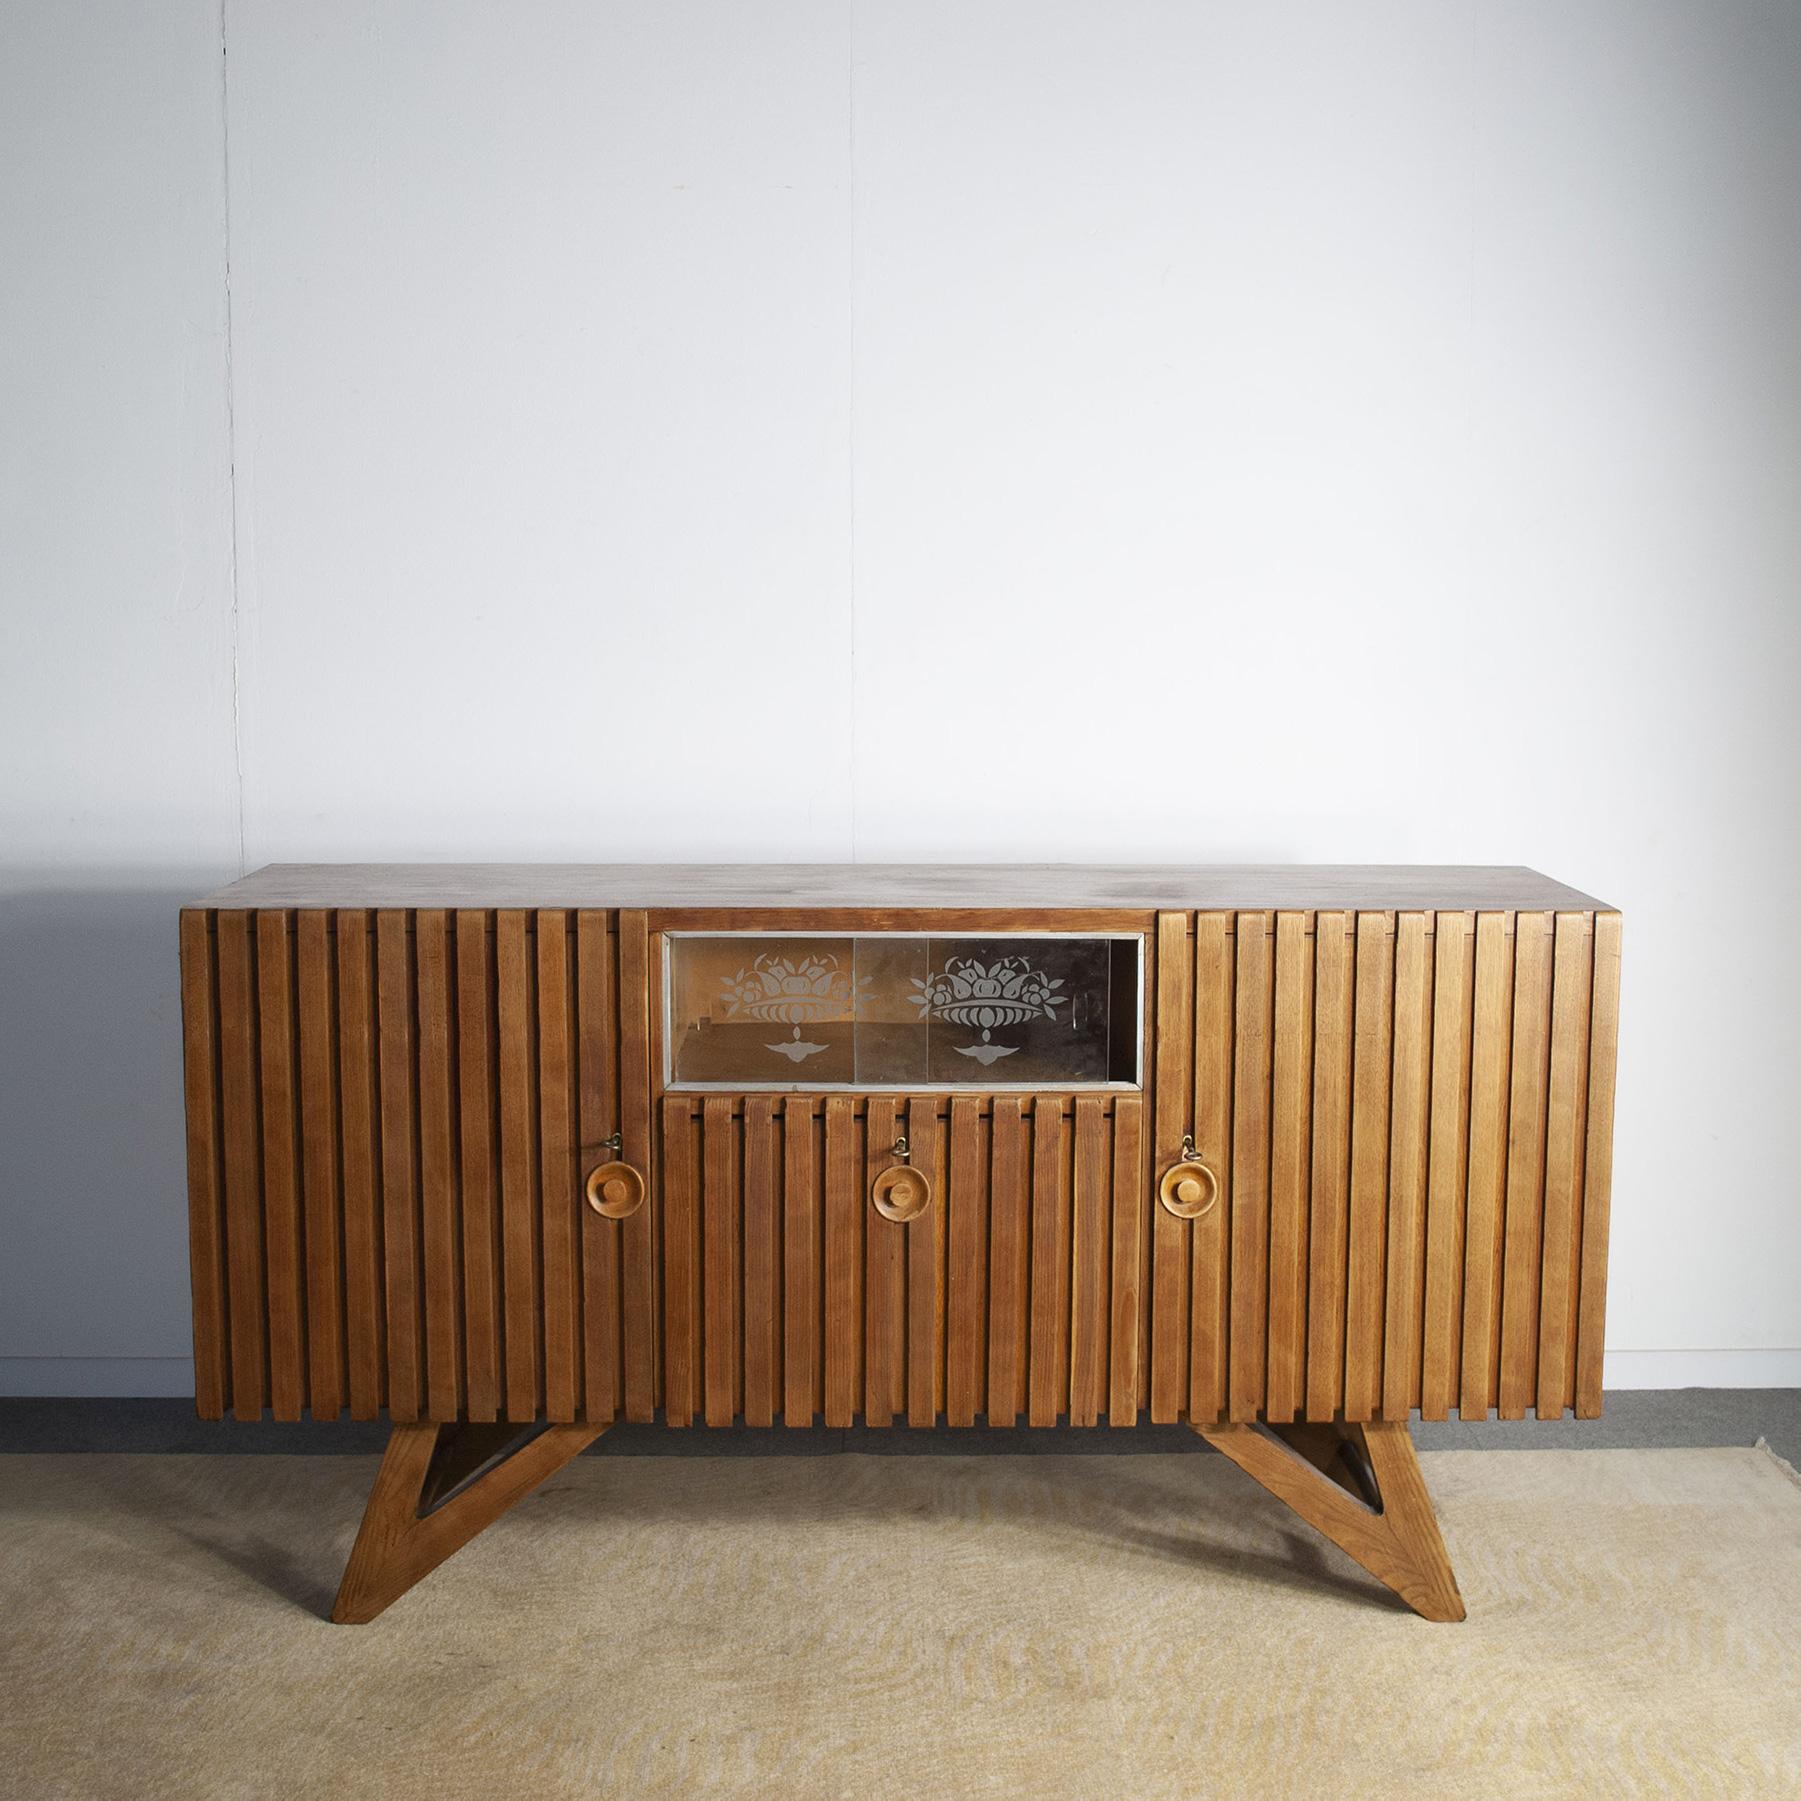 Early 1950s Italian sideboard, light oak wood frame composed of two side doors with related drawers a small central display case and a bar compartment . The tapered oak type and the slender, assertive style lead the object study to the Turin school